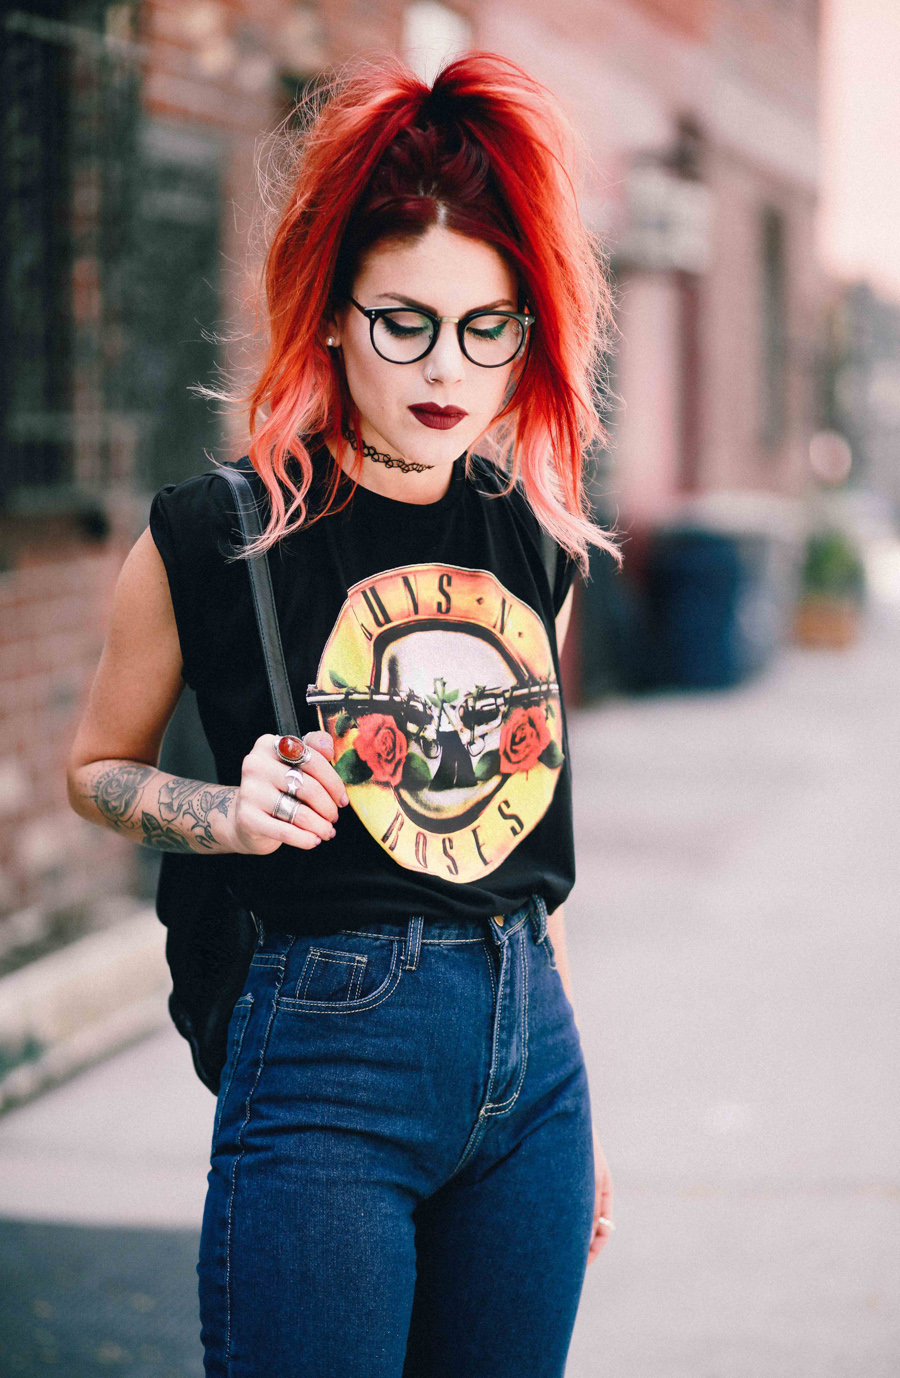 Le Happy wearing high waisted jeans and Guns n Roses tee